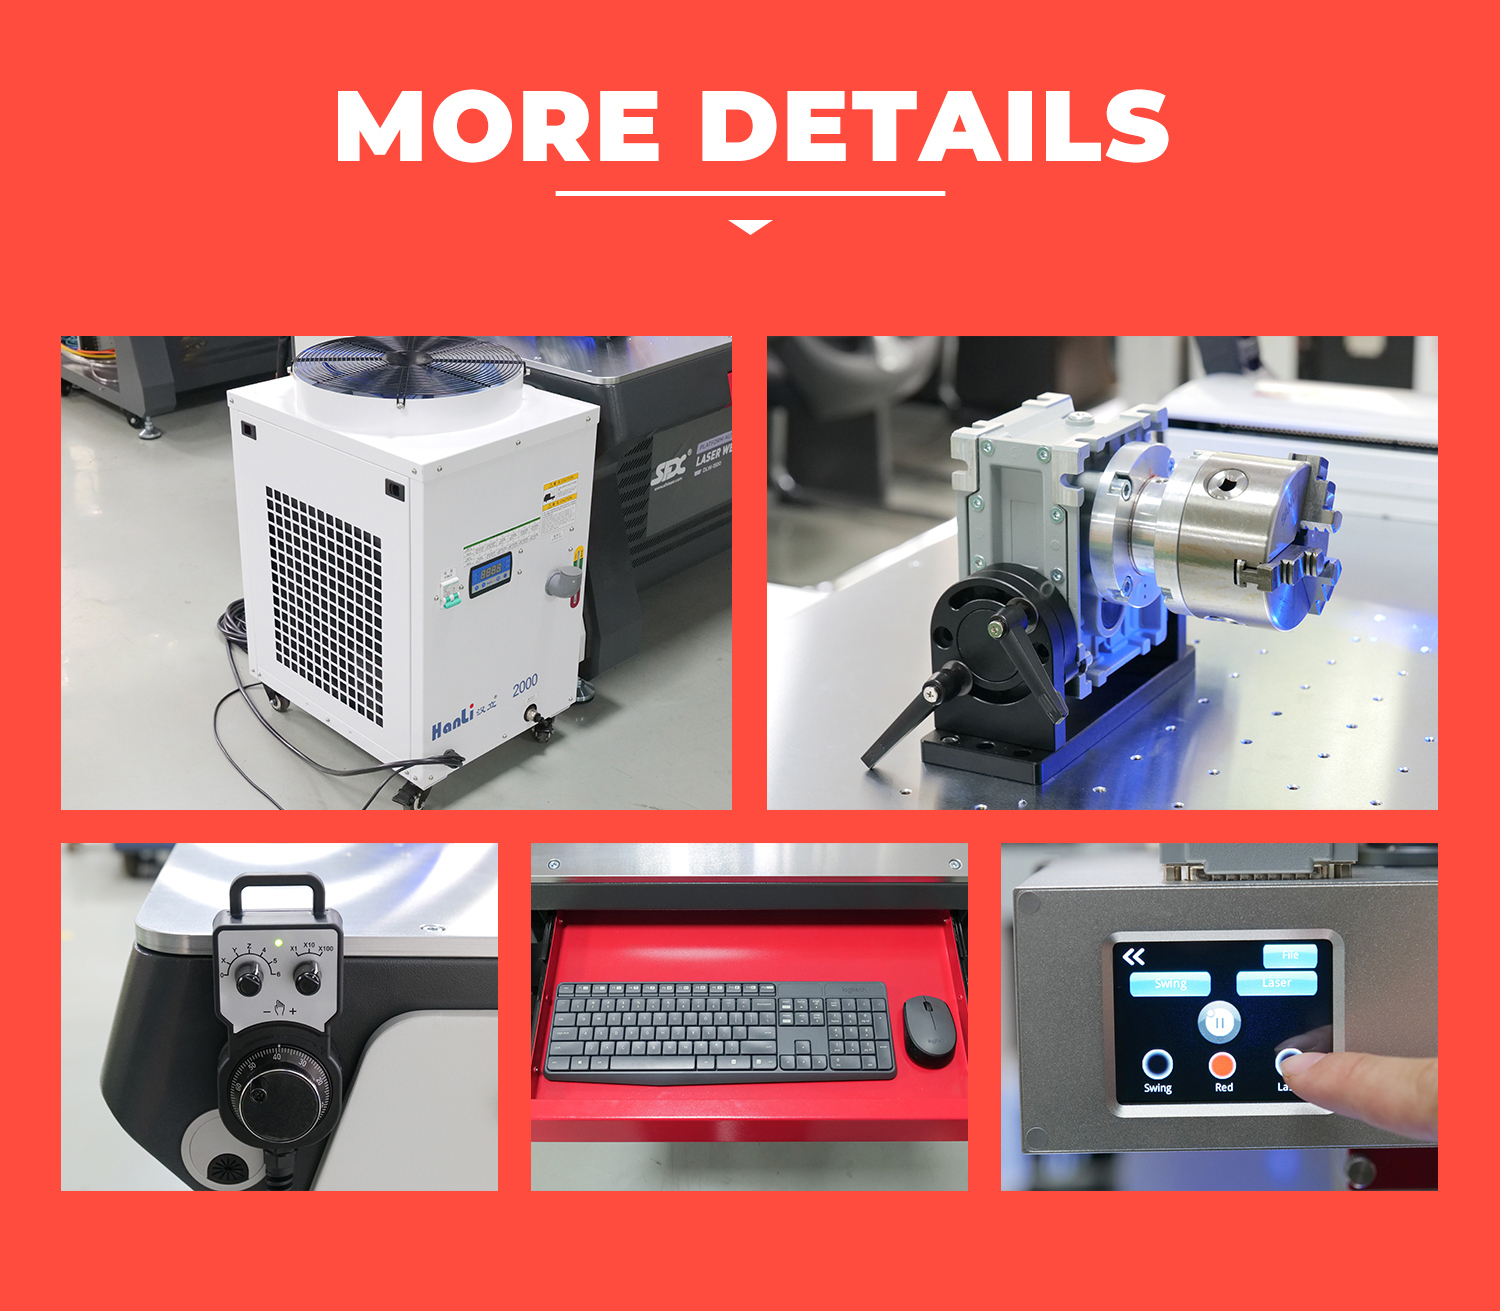 SFX 2000W Platform Automatic Laser Welding Machine With Five Axis for Efficient Metal Welding  SFX 2000W Platform Automatic Laser Welding Machine With Five Axis for Efficient Metal Welding Water laser welding machine,platform laser welding machine,automatic laser welding machine,automatic laser welder for metal welding,metal welding platform laser welding machine,SFX laser